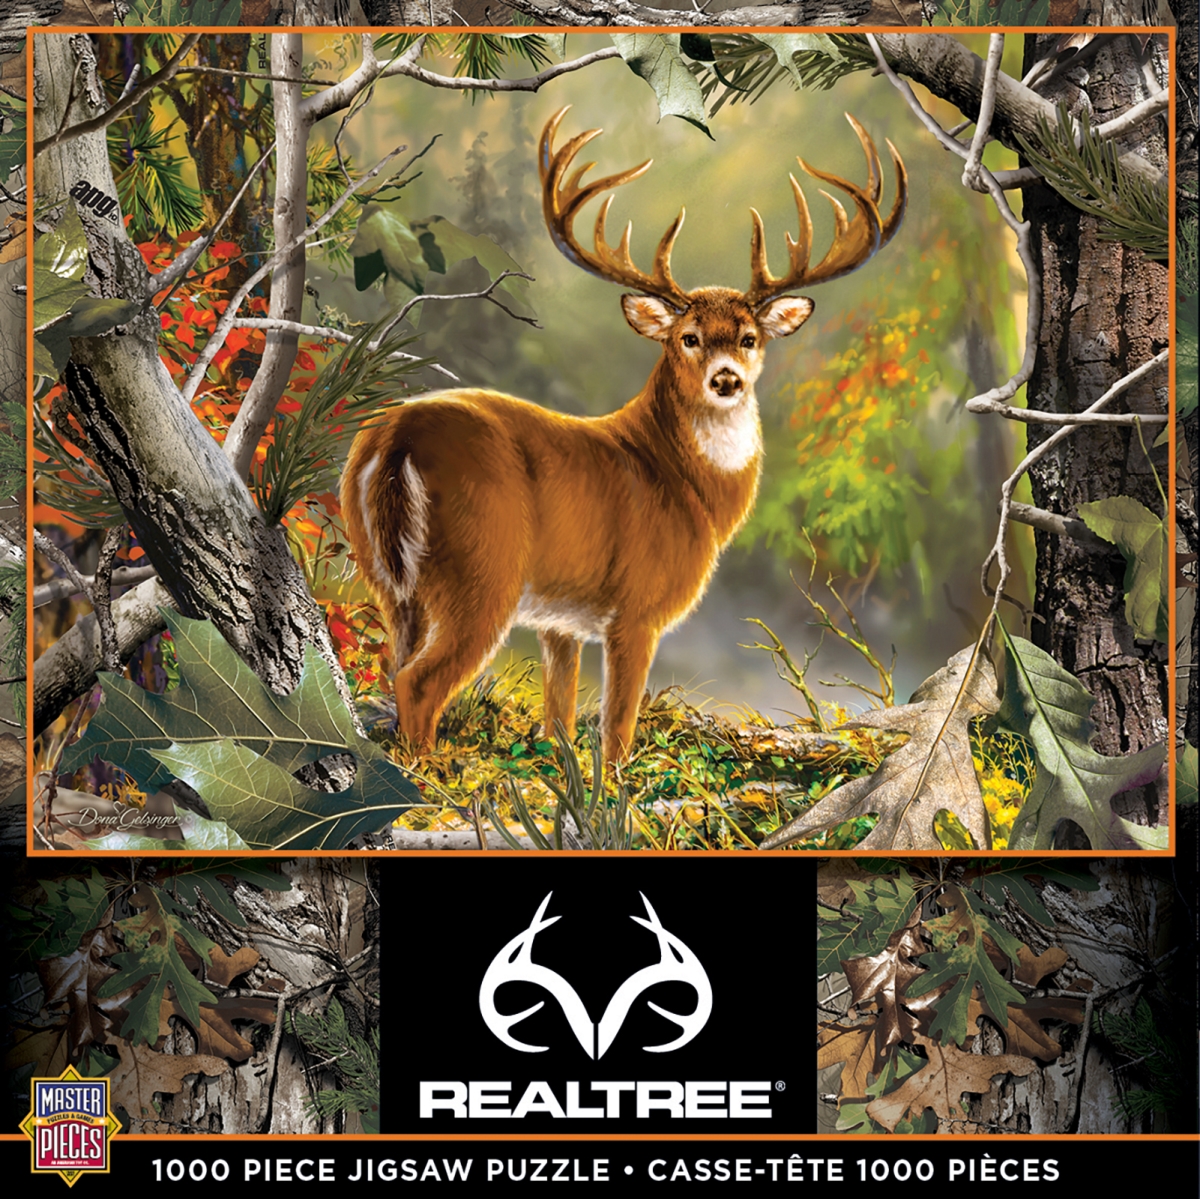 71751 19.25 X 26.75 In. Realtree Backcountry Buck Jigsaw Puzzle - 1000 Piece